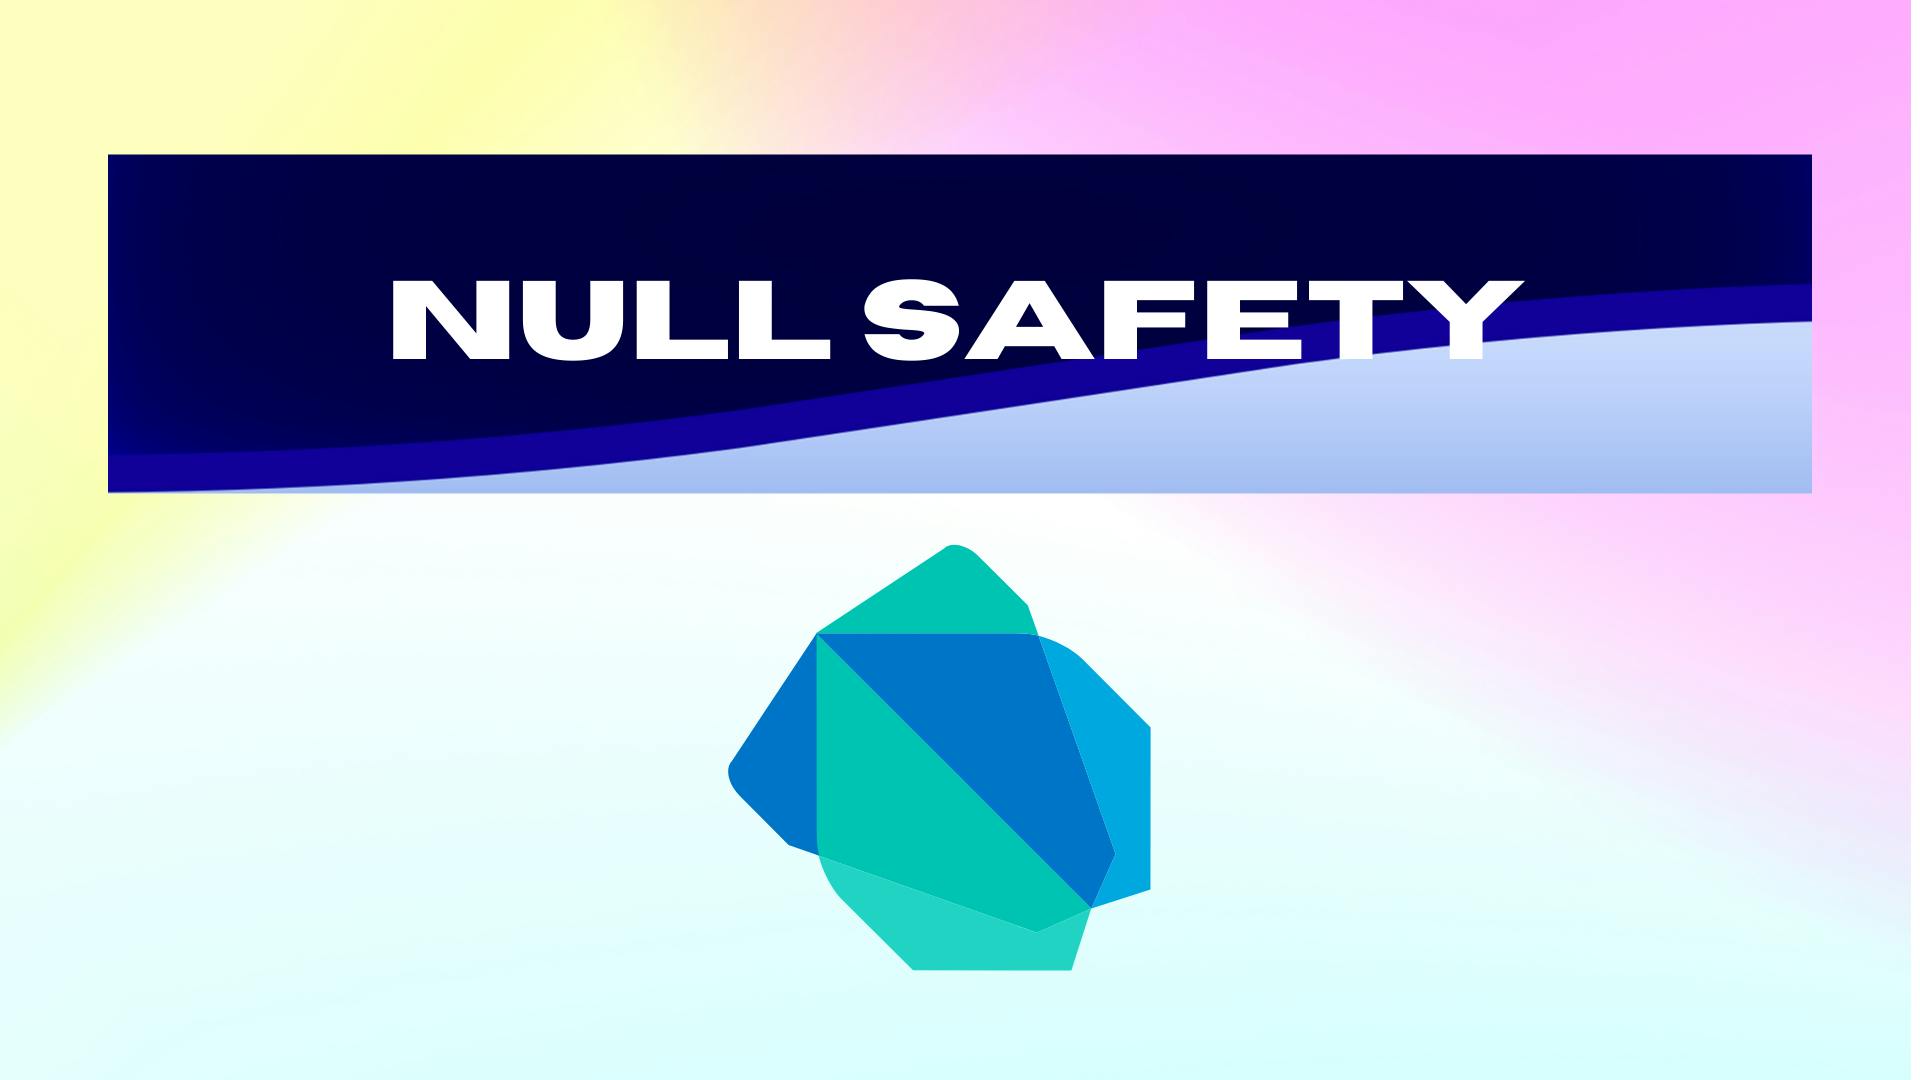 null.png